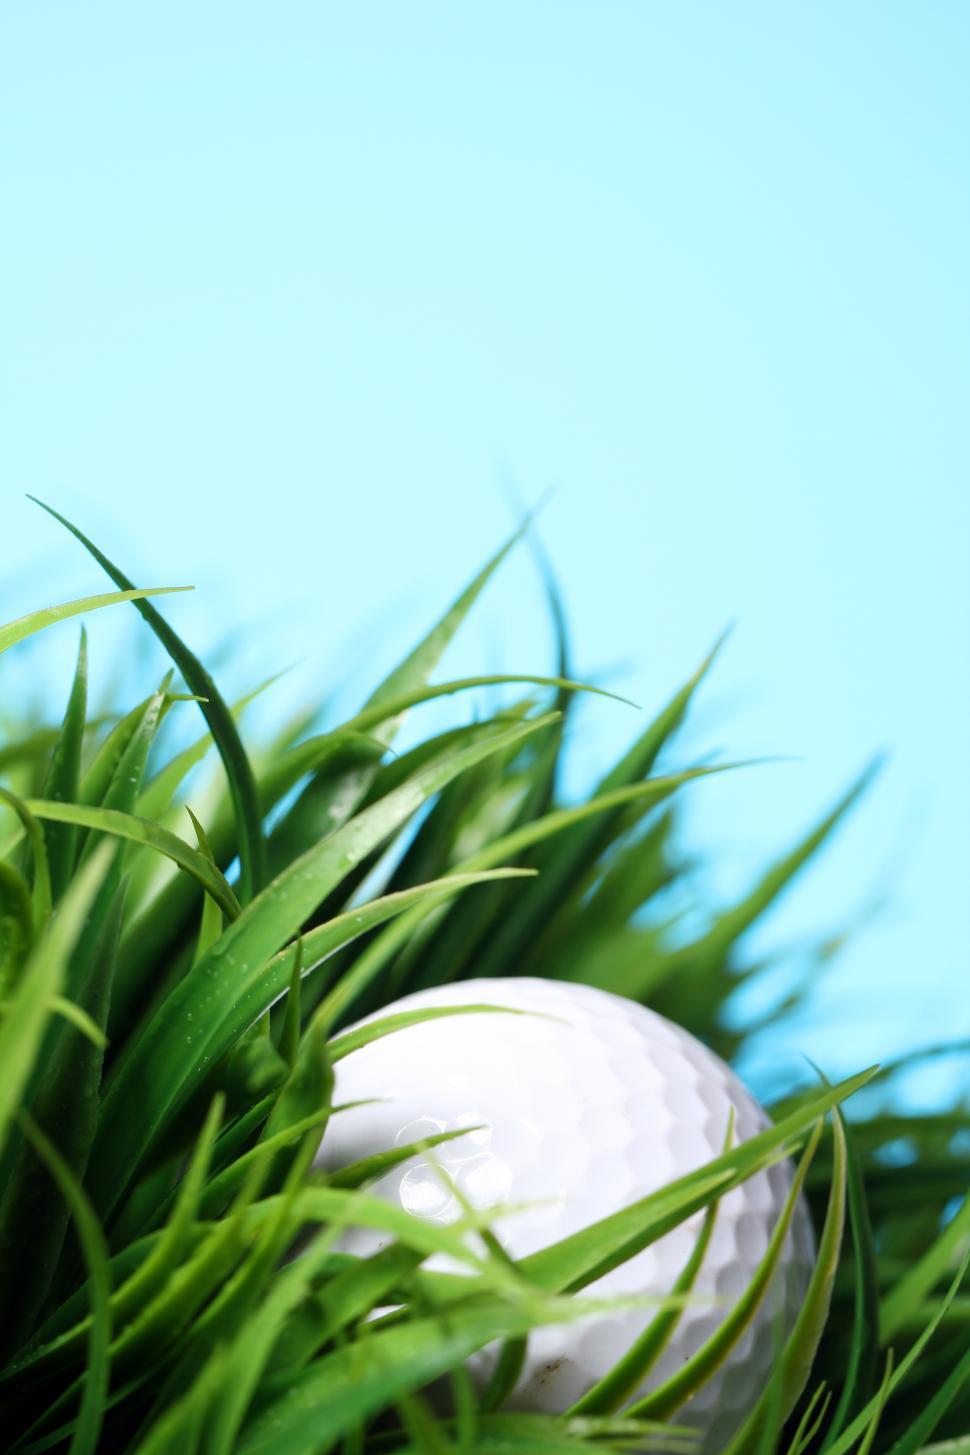 Free Image of Golf ball deep in the grass 